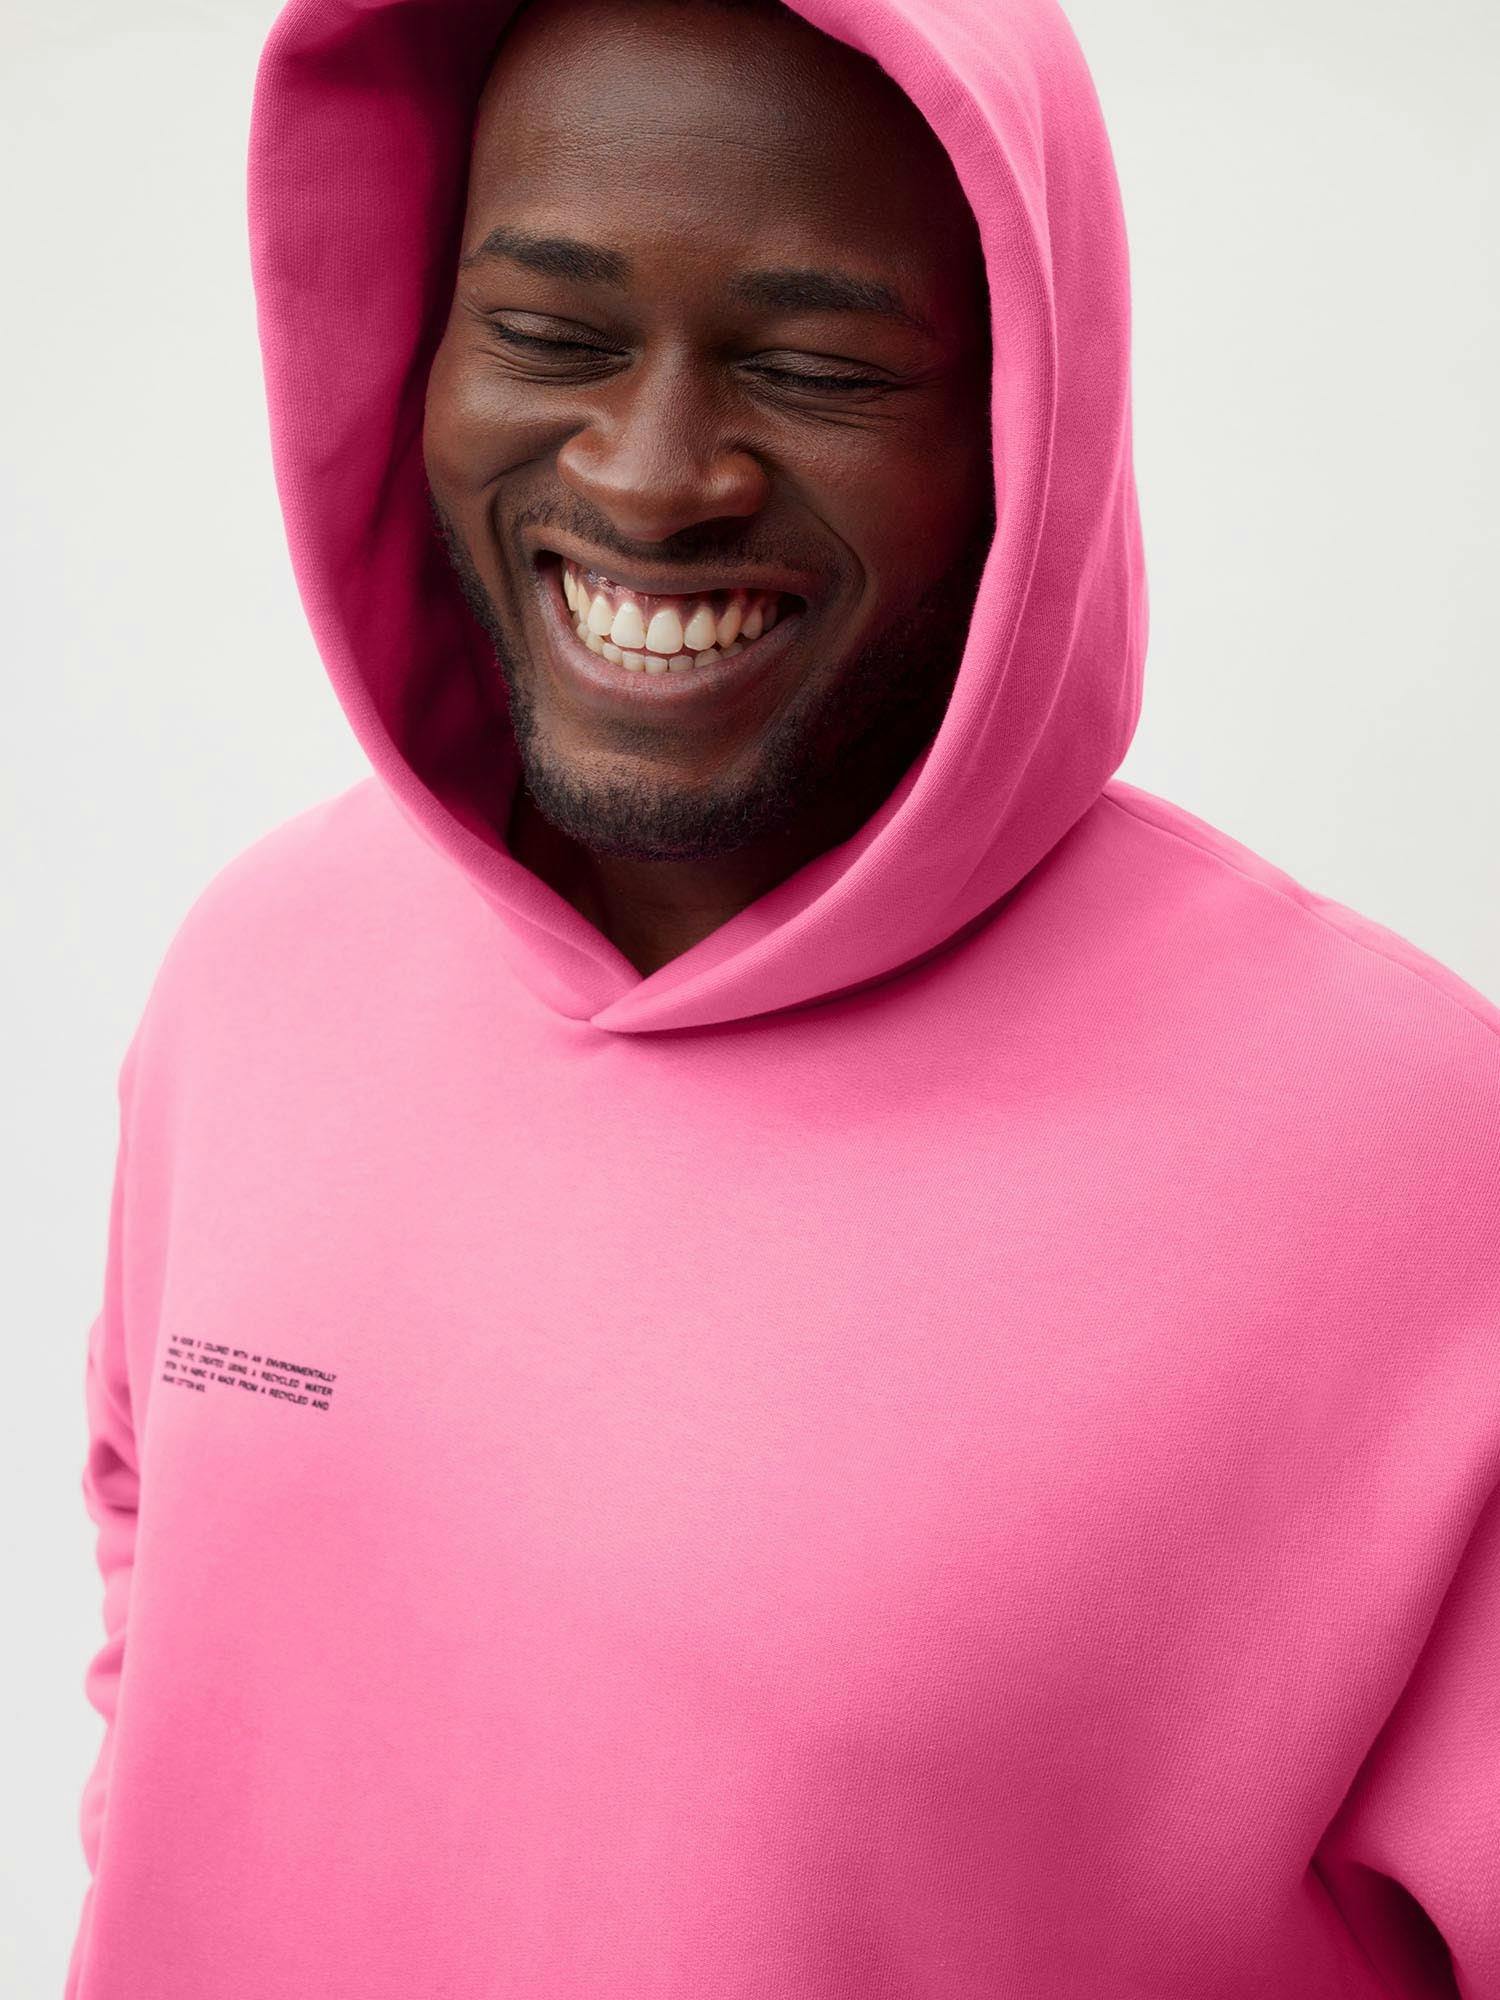 https://cdn.shopify.com/s/files/1/0035/1309/0115/products/Heavyweight-Recycled-Cotton-Hoodie-Flamingo-Pink-Male-4_2dfdaa0d-19c1-4a91-afd3-563d463e29be.jpg?v=1671545317